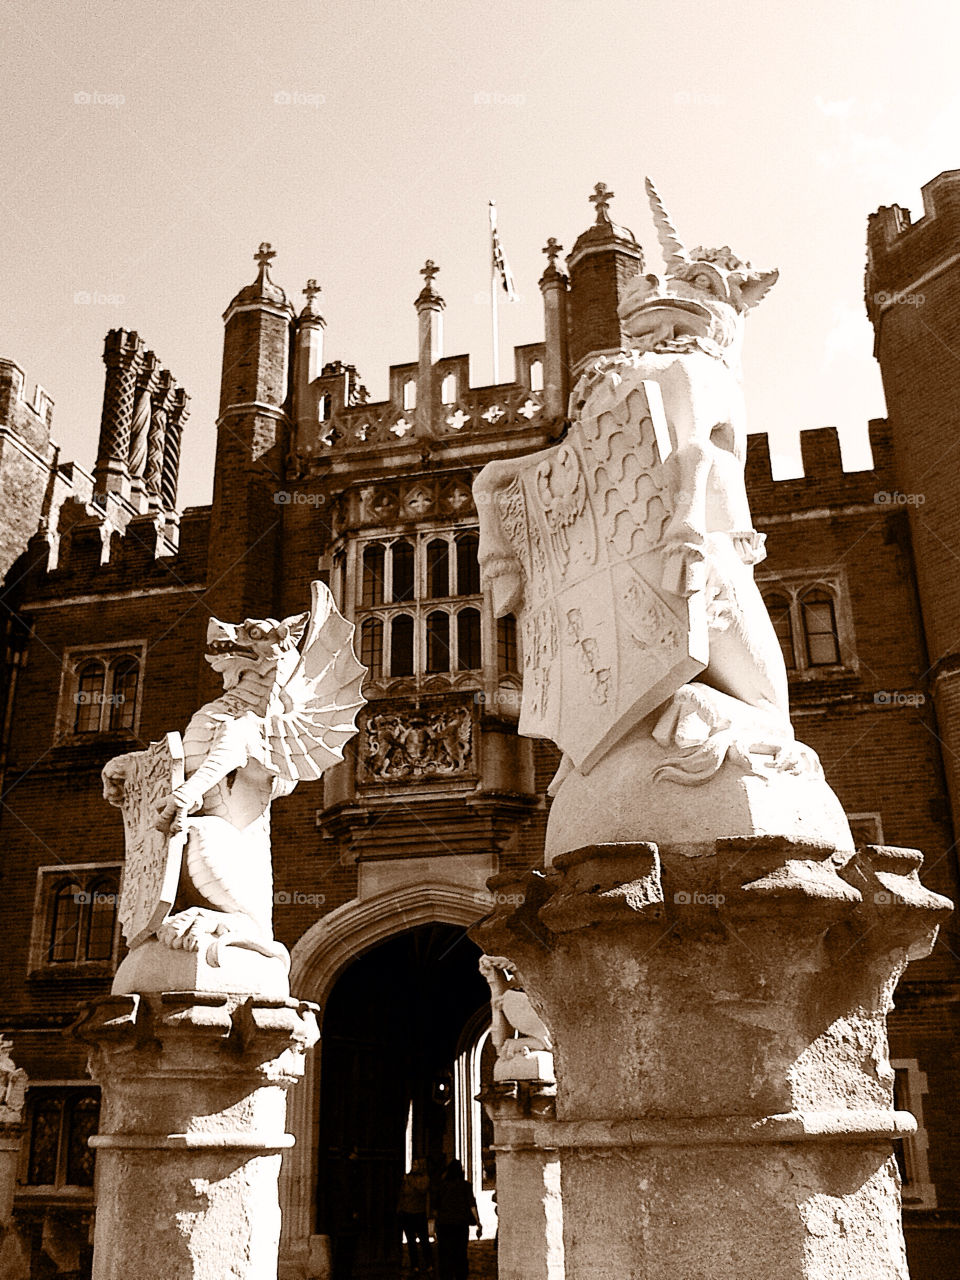 london sculptures palace dragons by lateproject